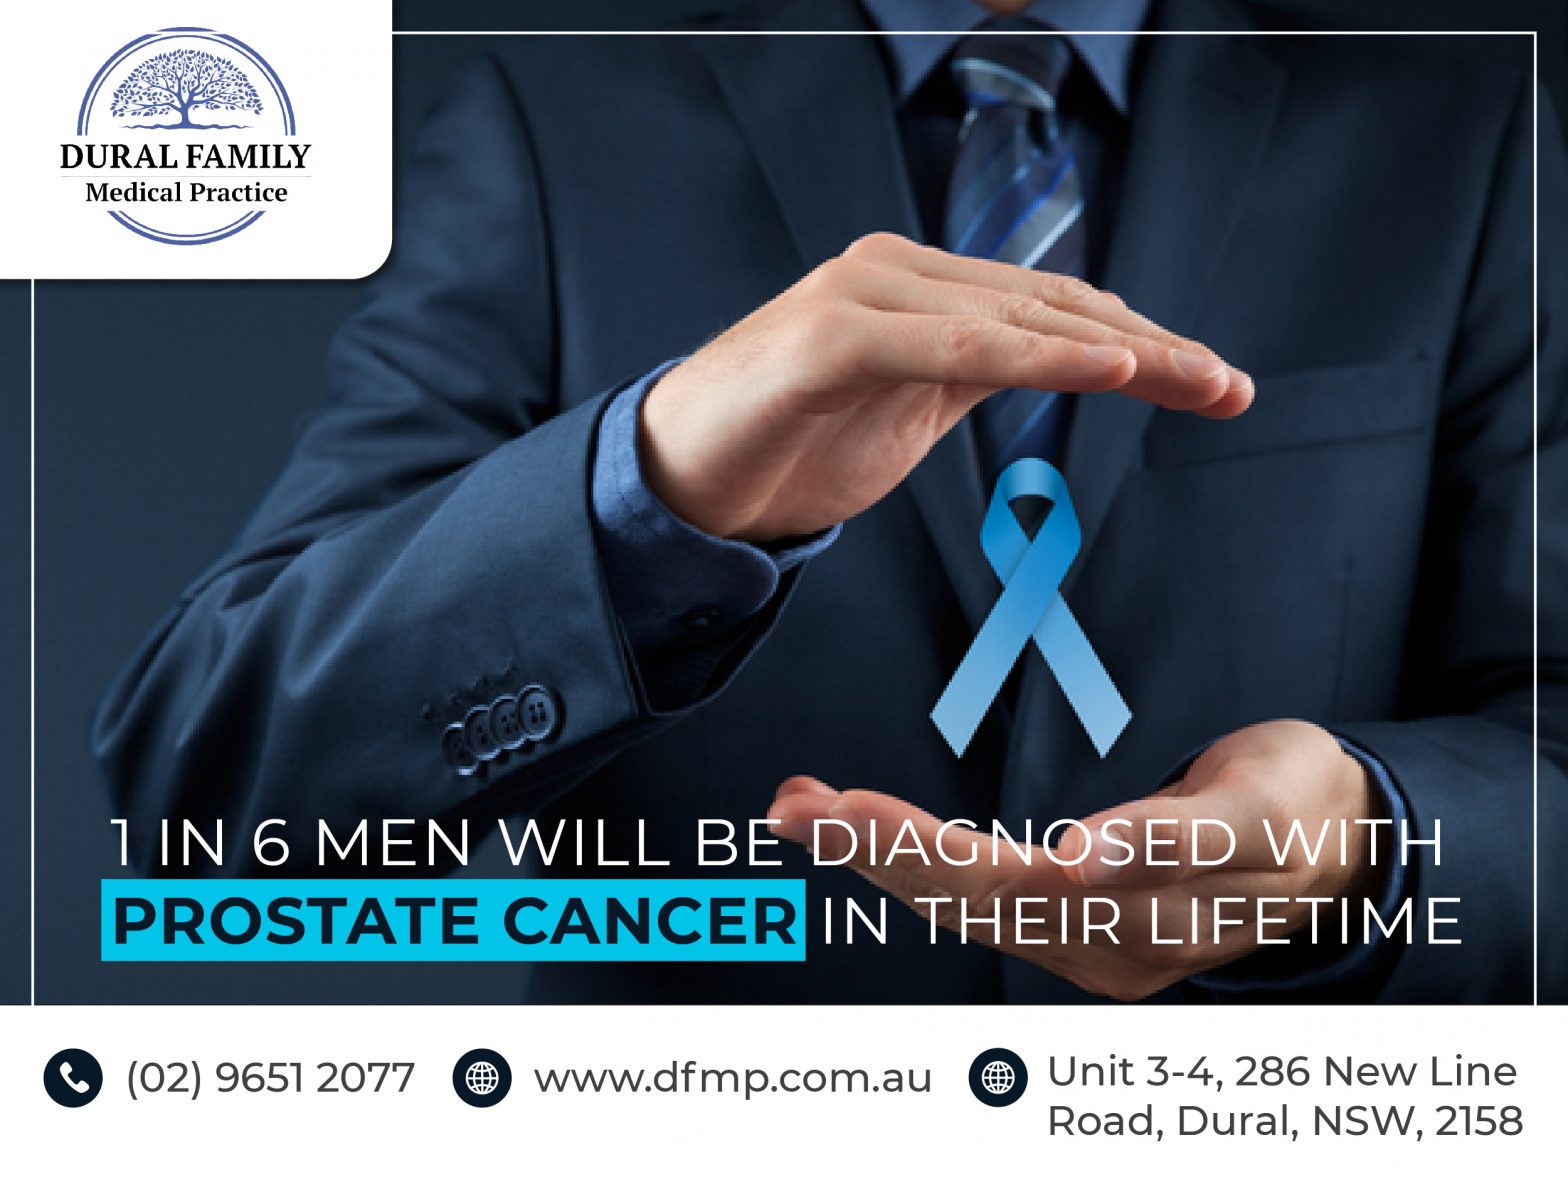 1 IN 6 MEN WILL BE DIAGNOSED WITH PROSTATE CANCER IN THEIR LIFETIME